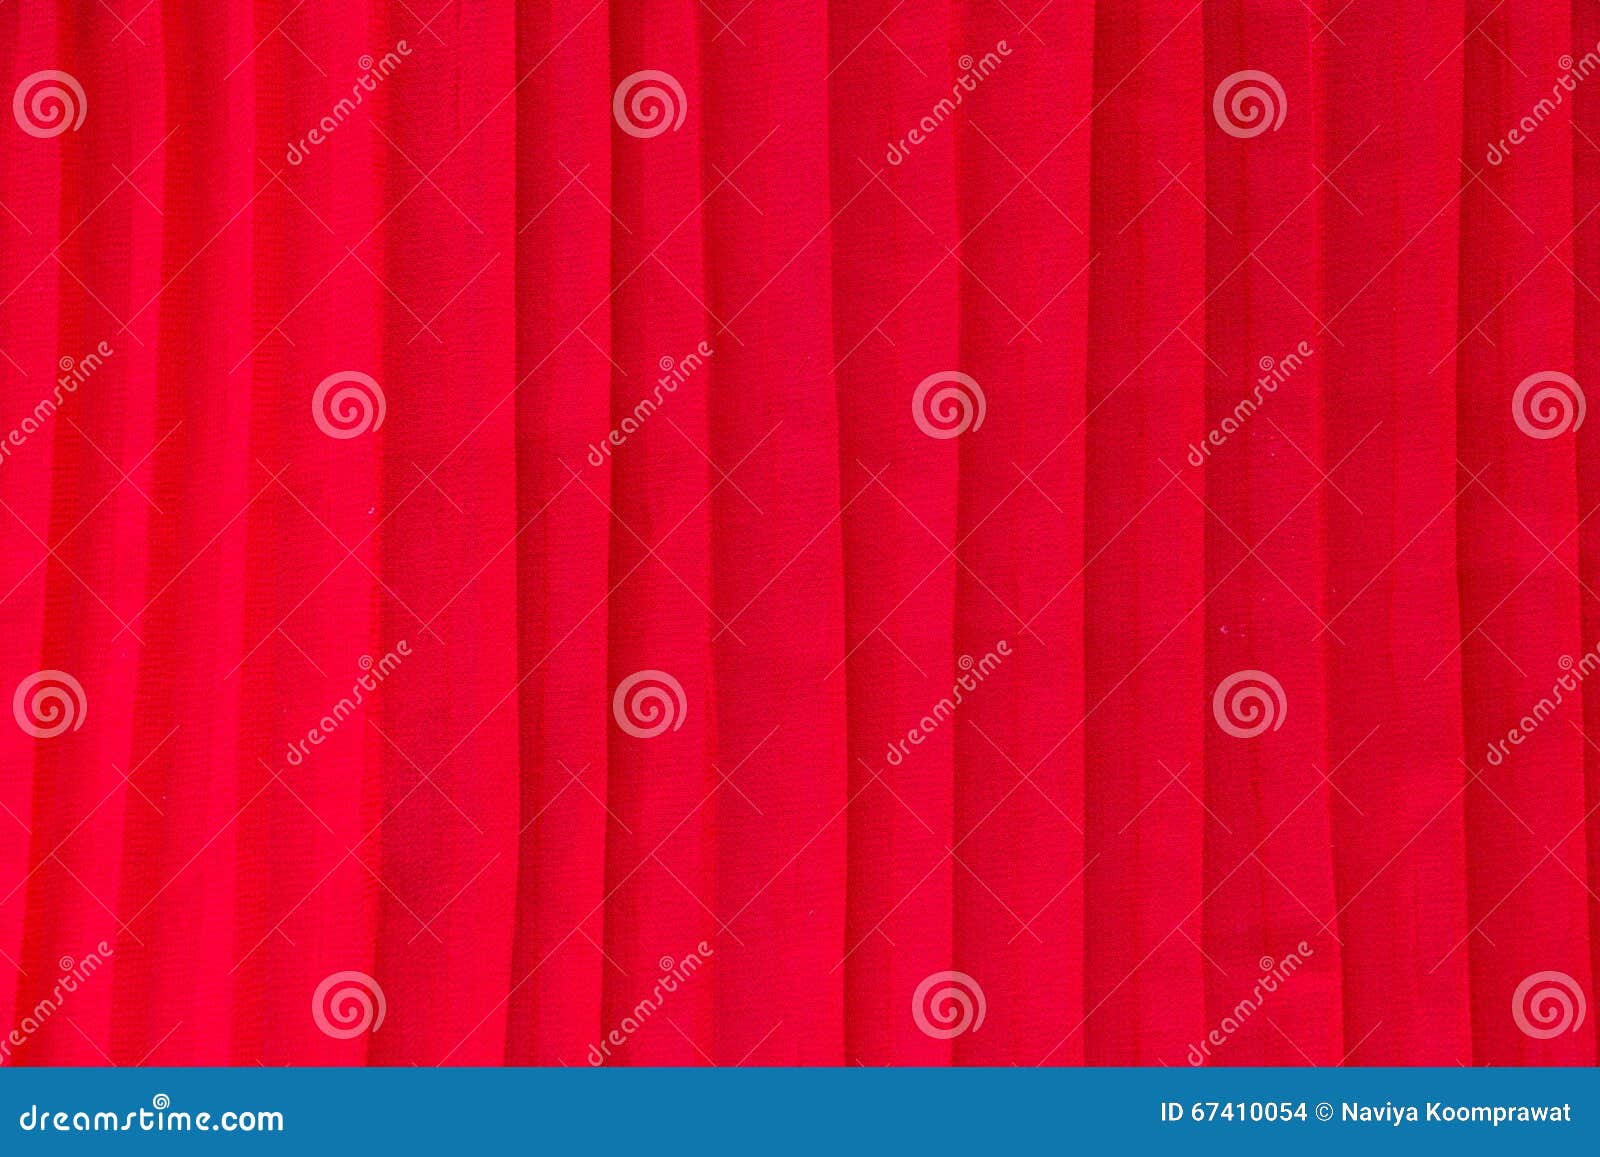 red pleat fabric background